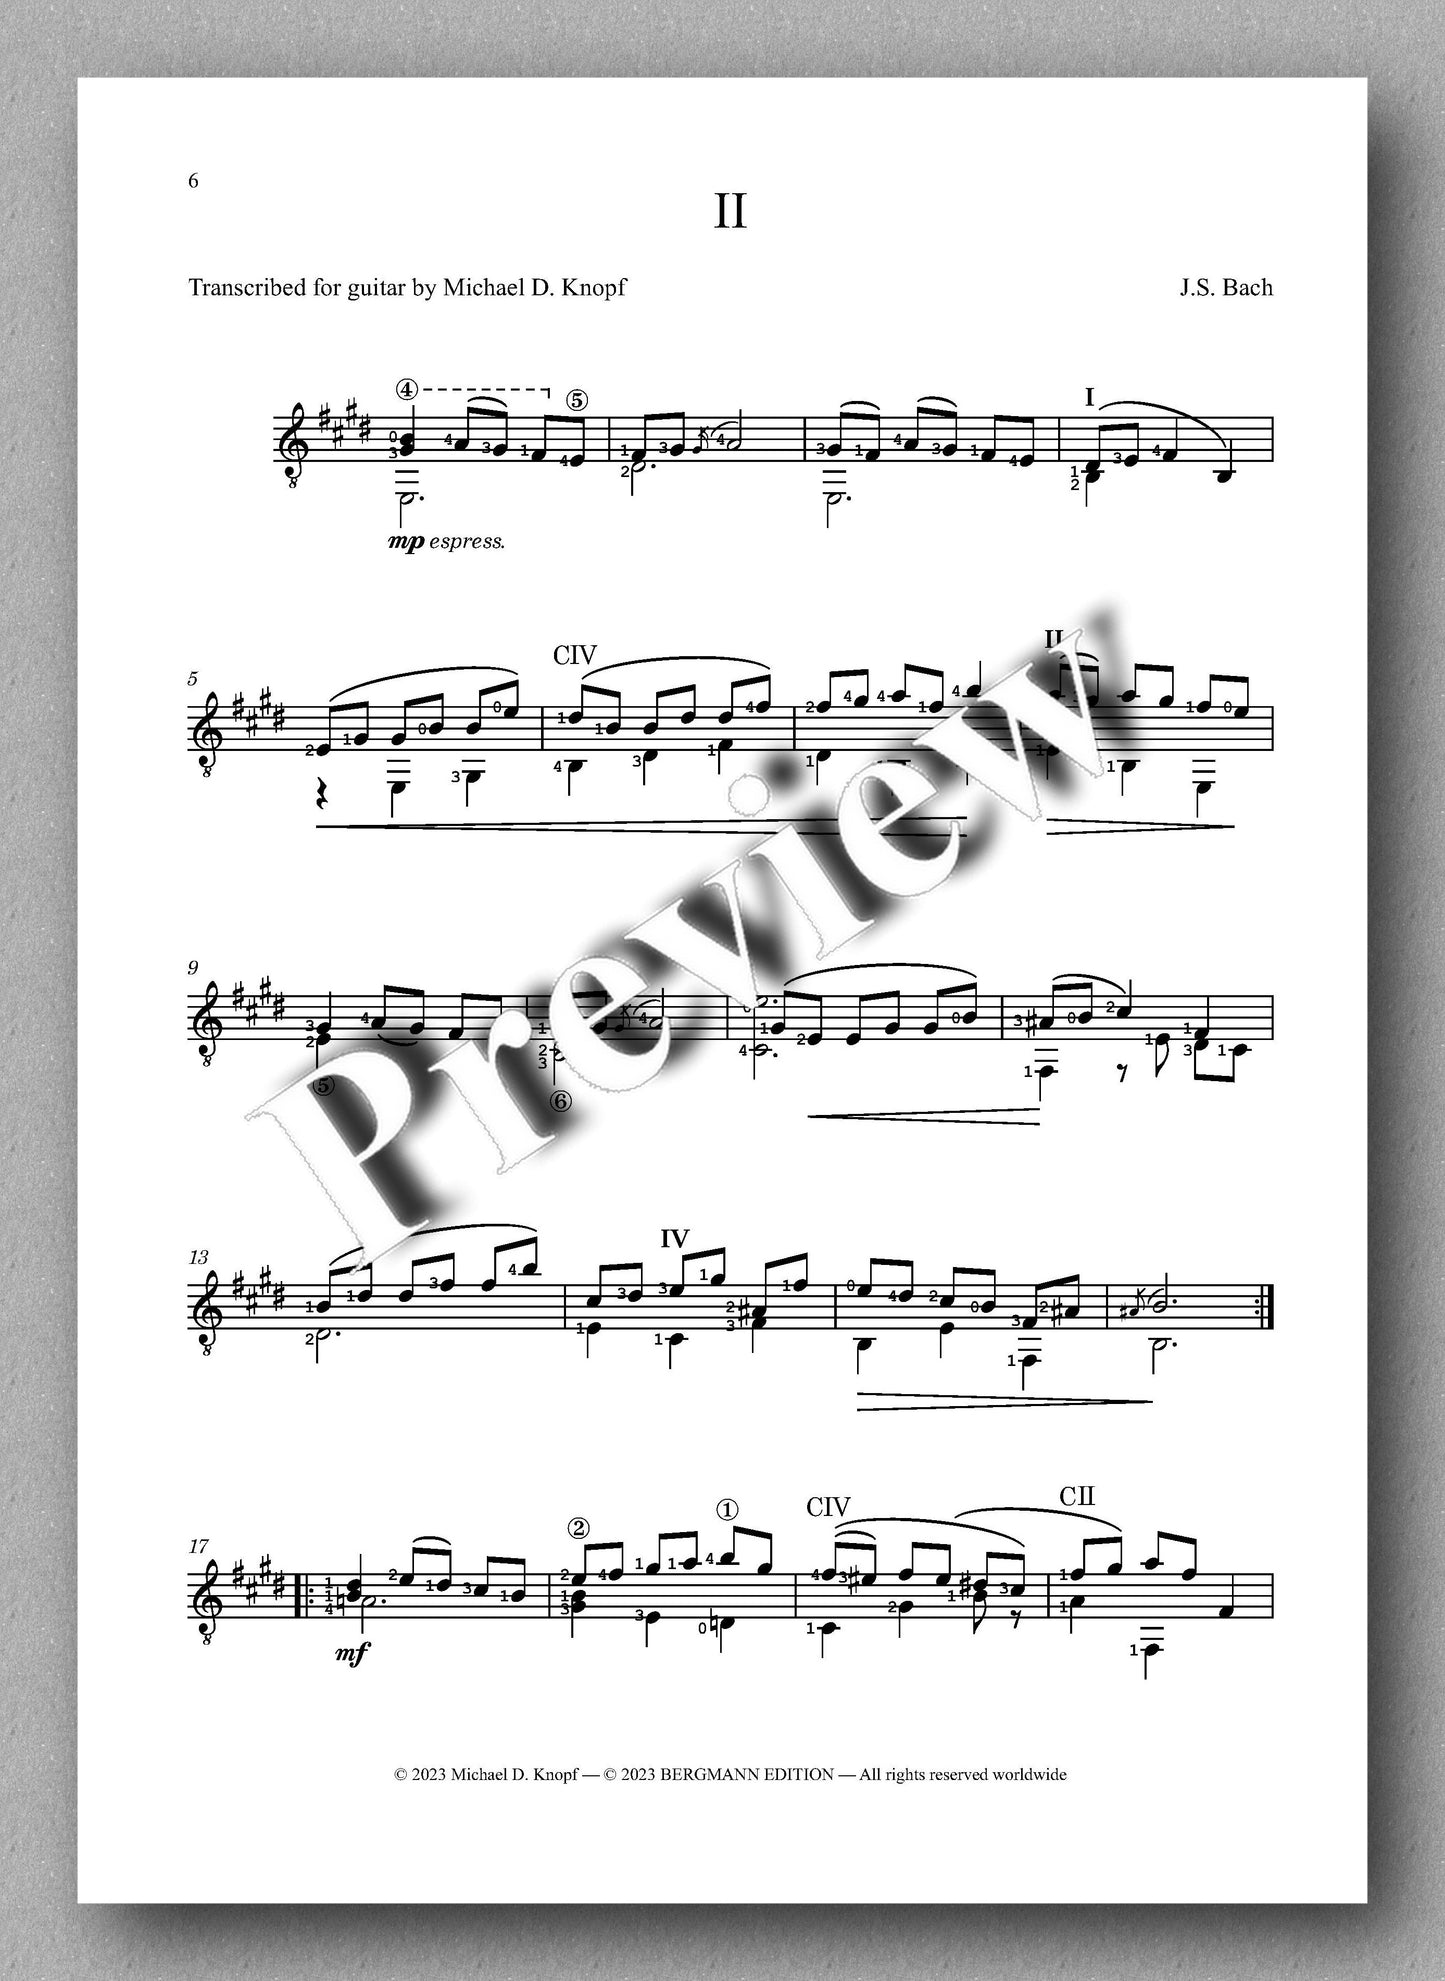 J.S.Bach, Two Minuets in E, BWV 1006 - preview of the music score 2